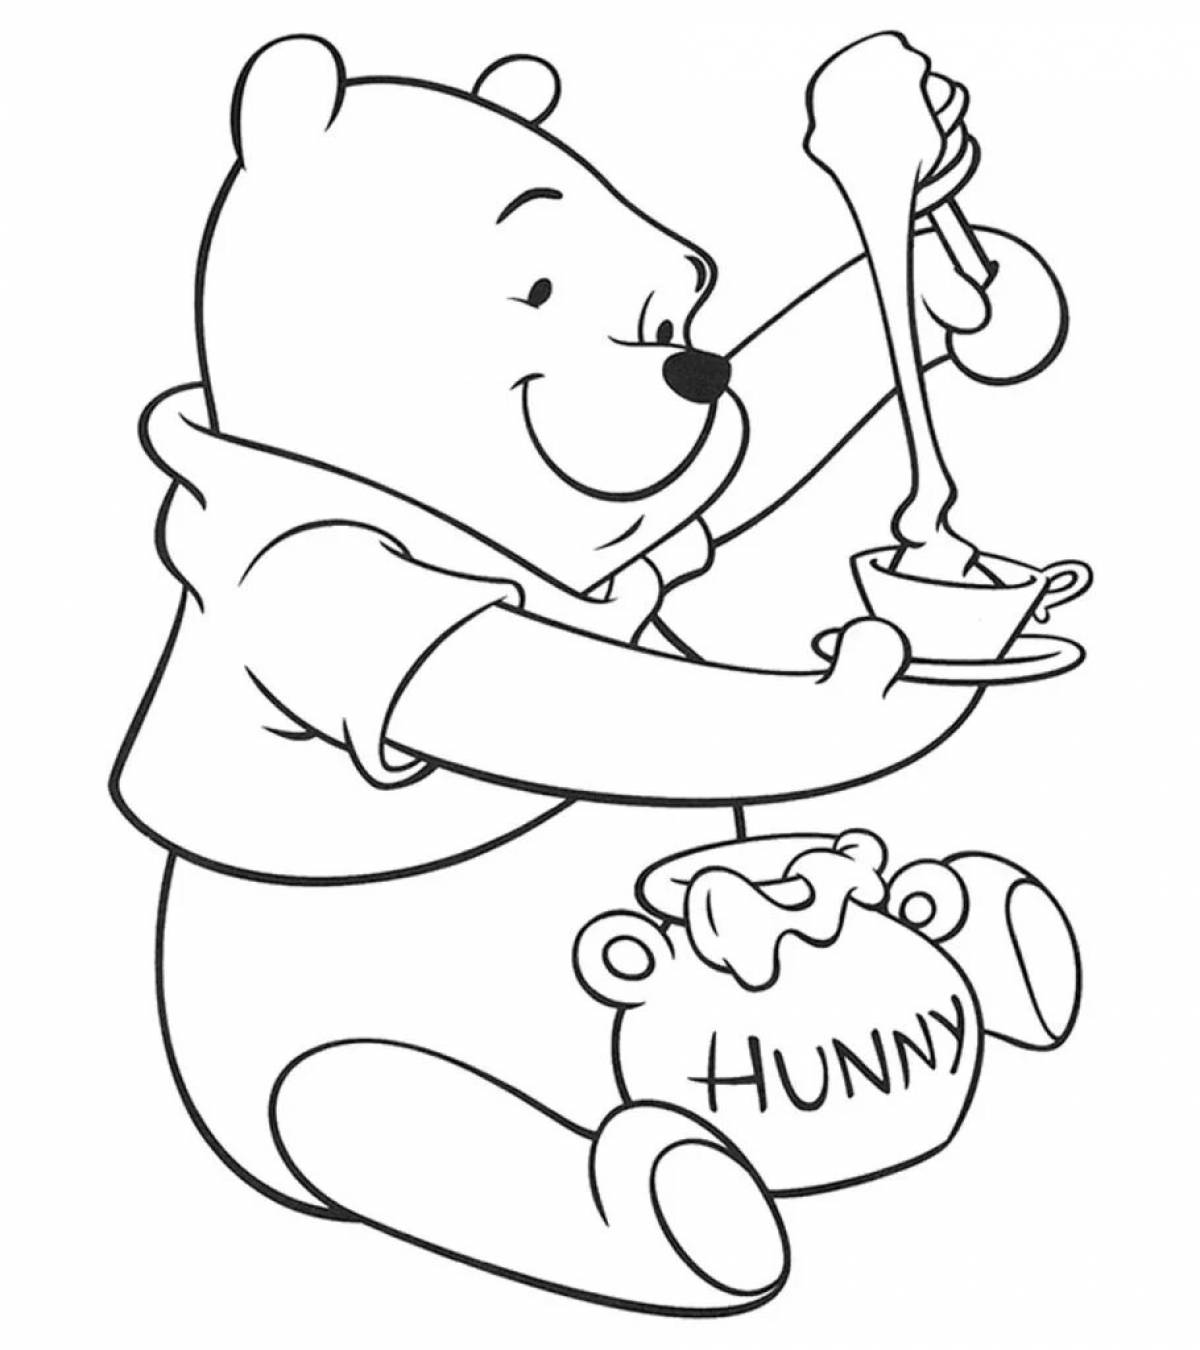 Wonderful bear with honey coloring book